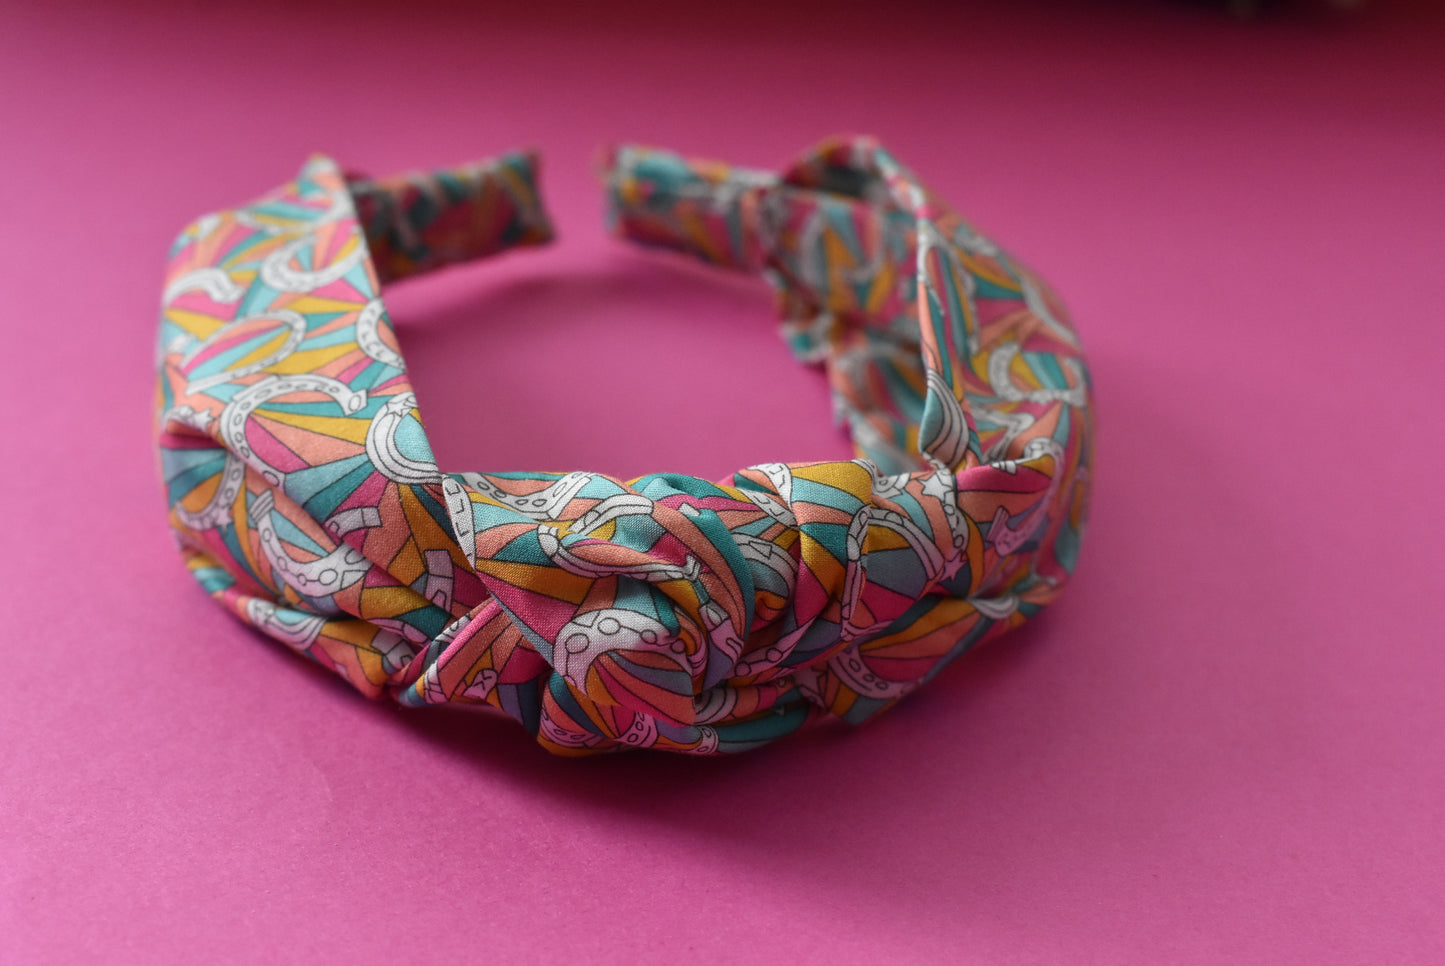 Kids Tot Knot Alice band - Liberty of London Derby Day print